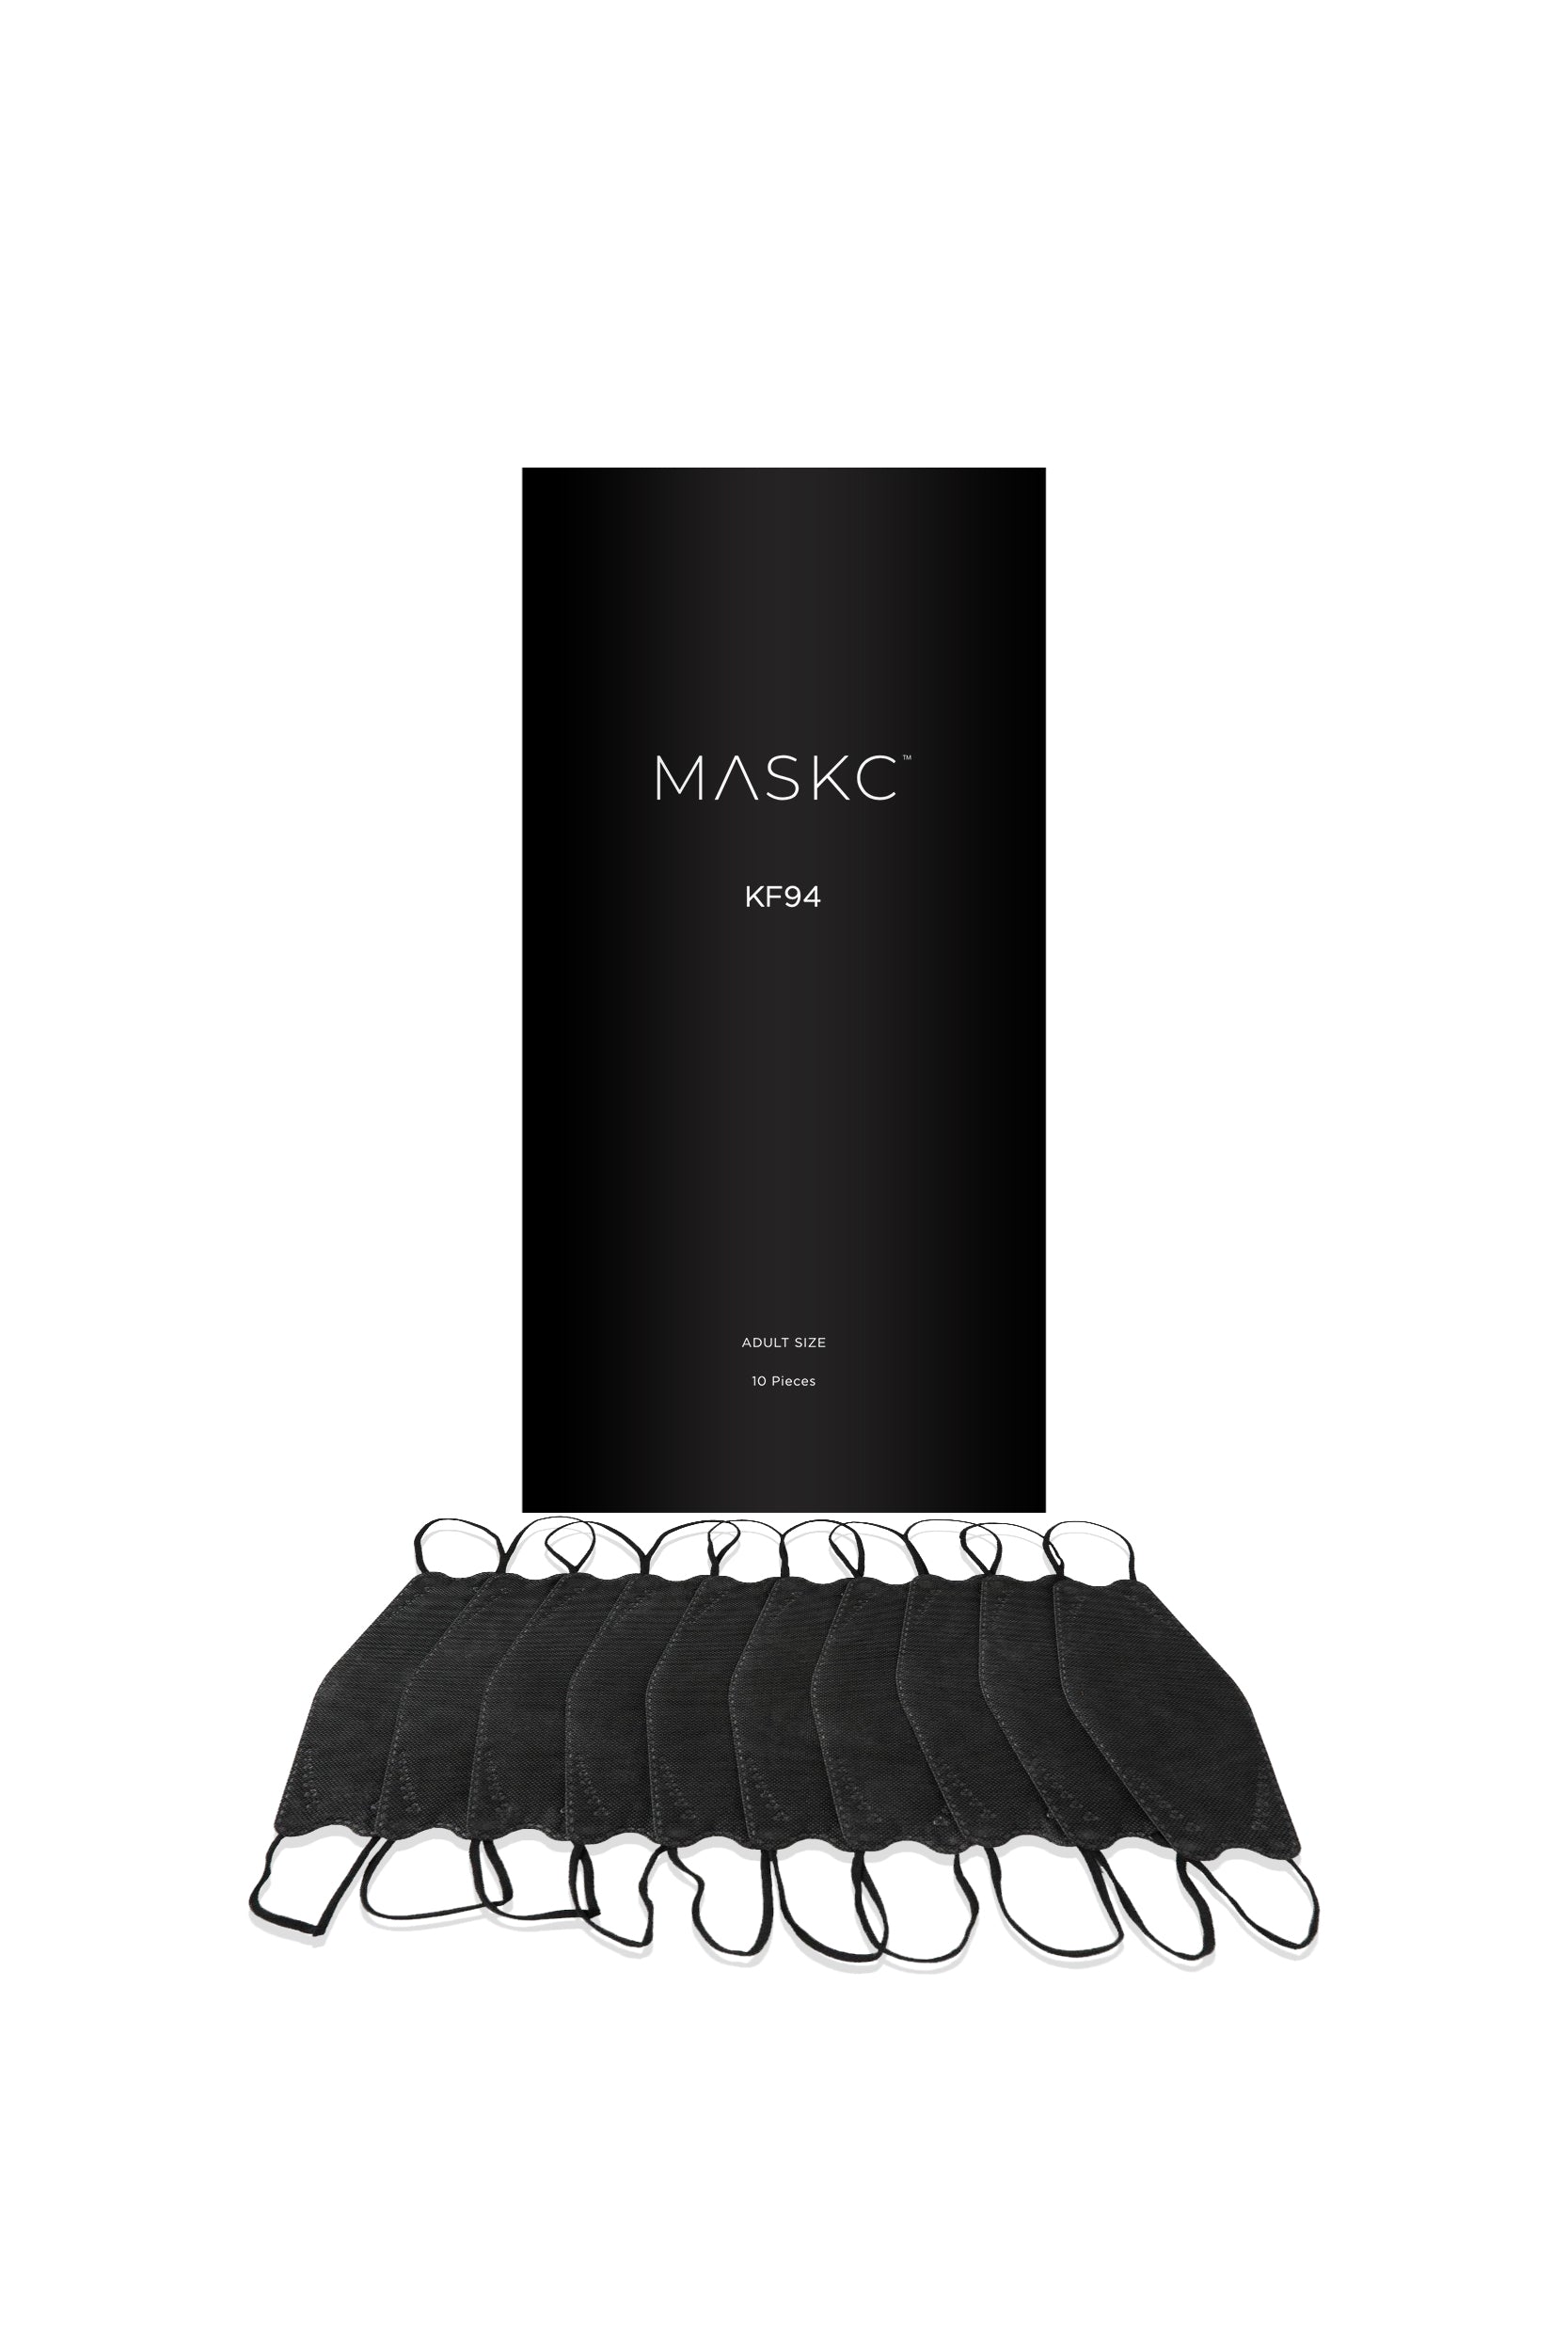 Pack of Black KF94 face masks. Each pack contains stylish high quality face masks. 